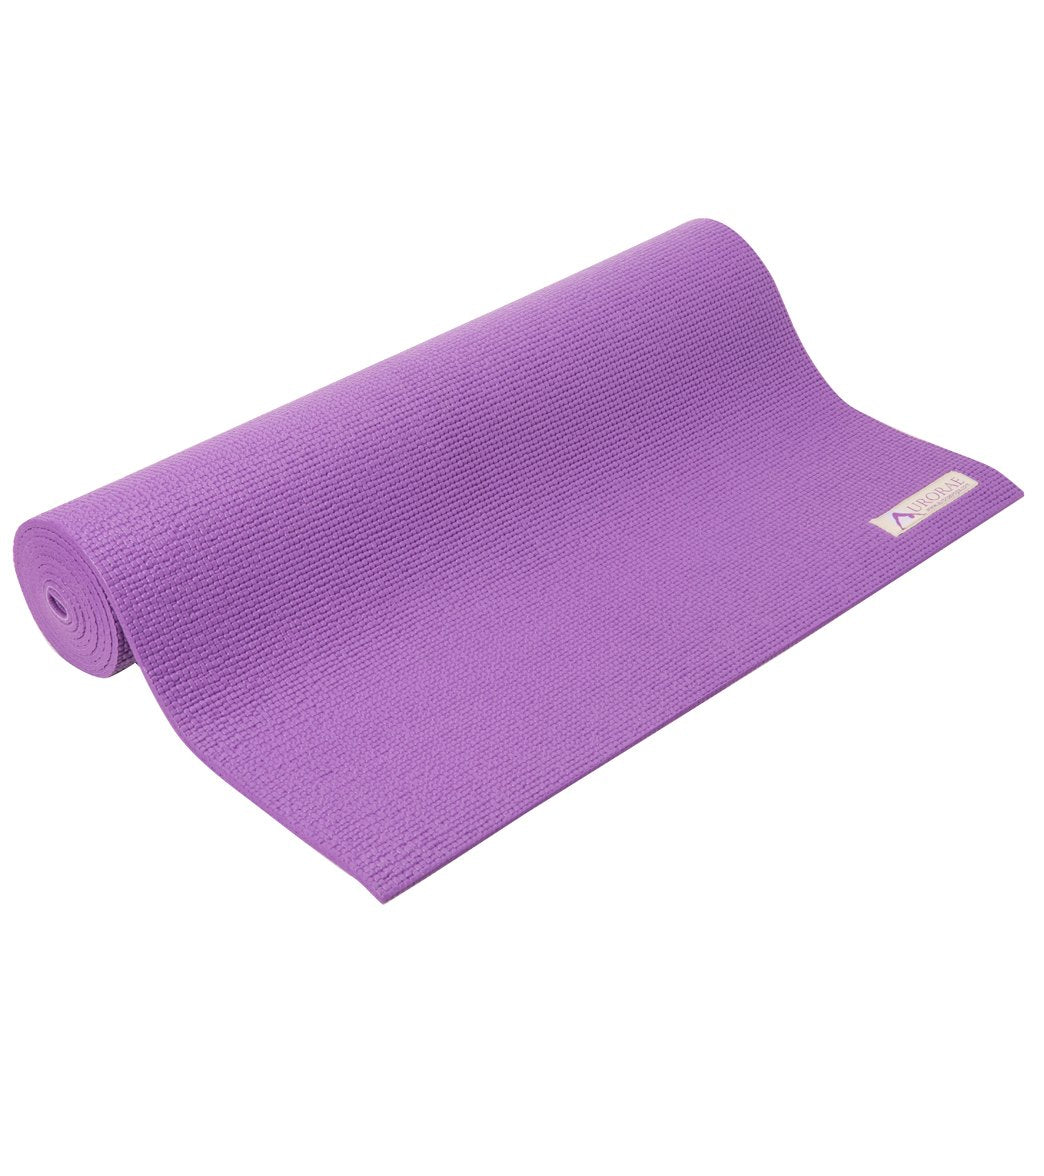  AURORAE Classic/Printed Extra Thick and Long Yoga Mat. Slip  Free Rosin included : Sports & Outdoors